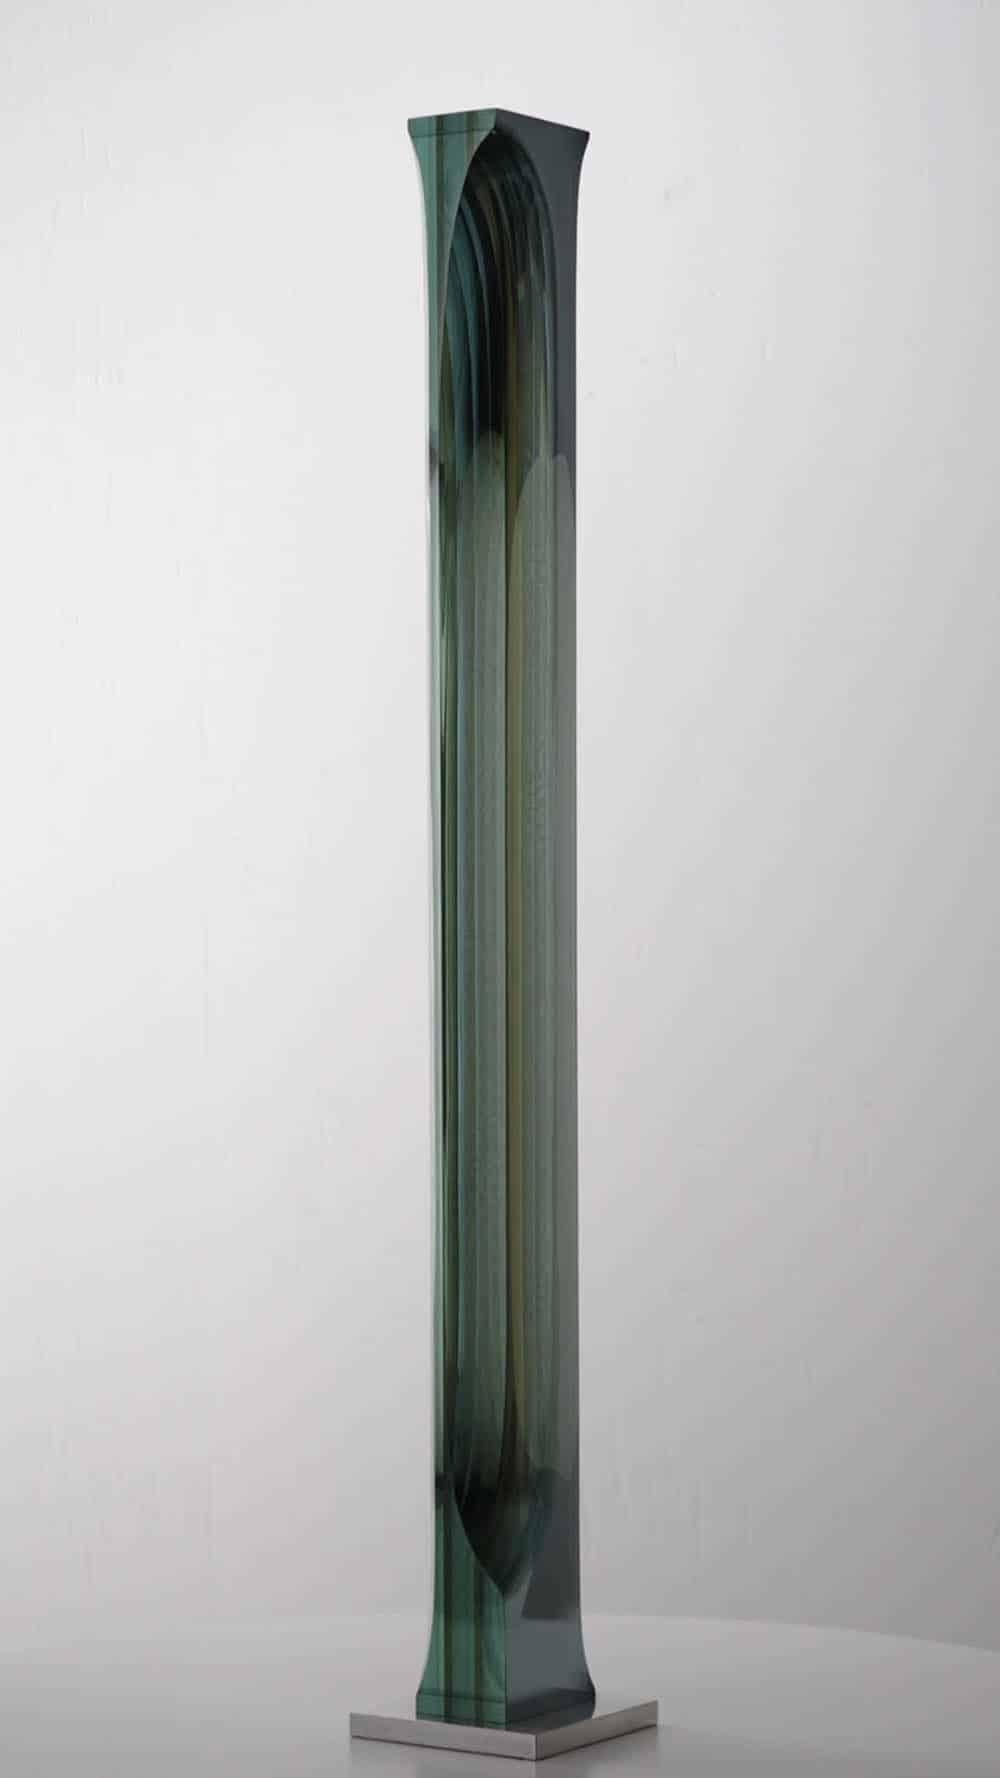 M.140801 by Toshio Iezumi - Contemporary glass sculpture, green, abstract For Sale 2